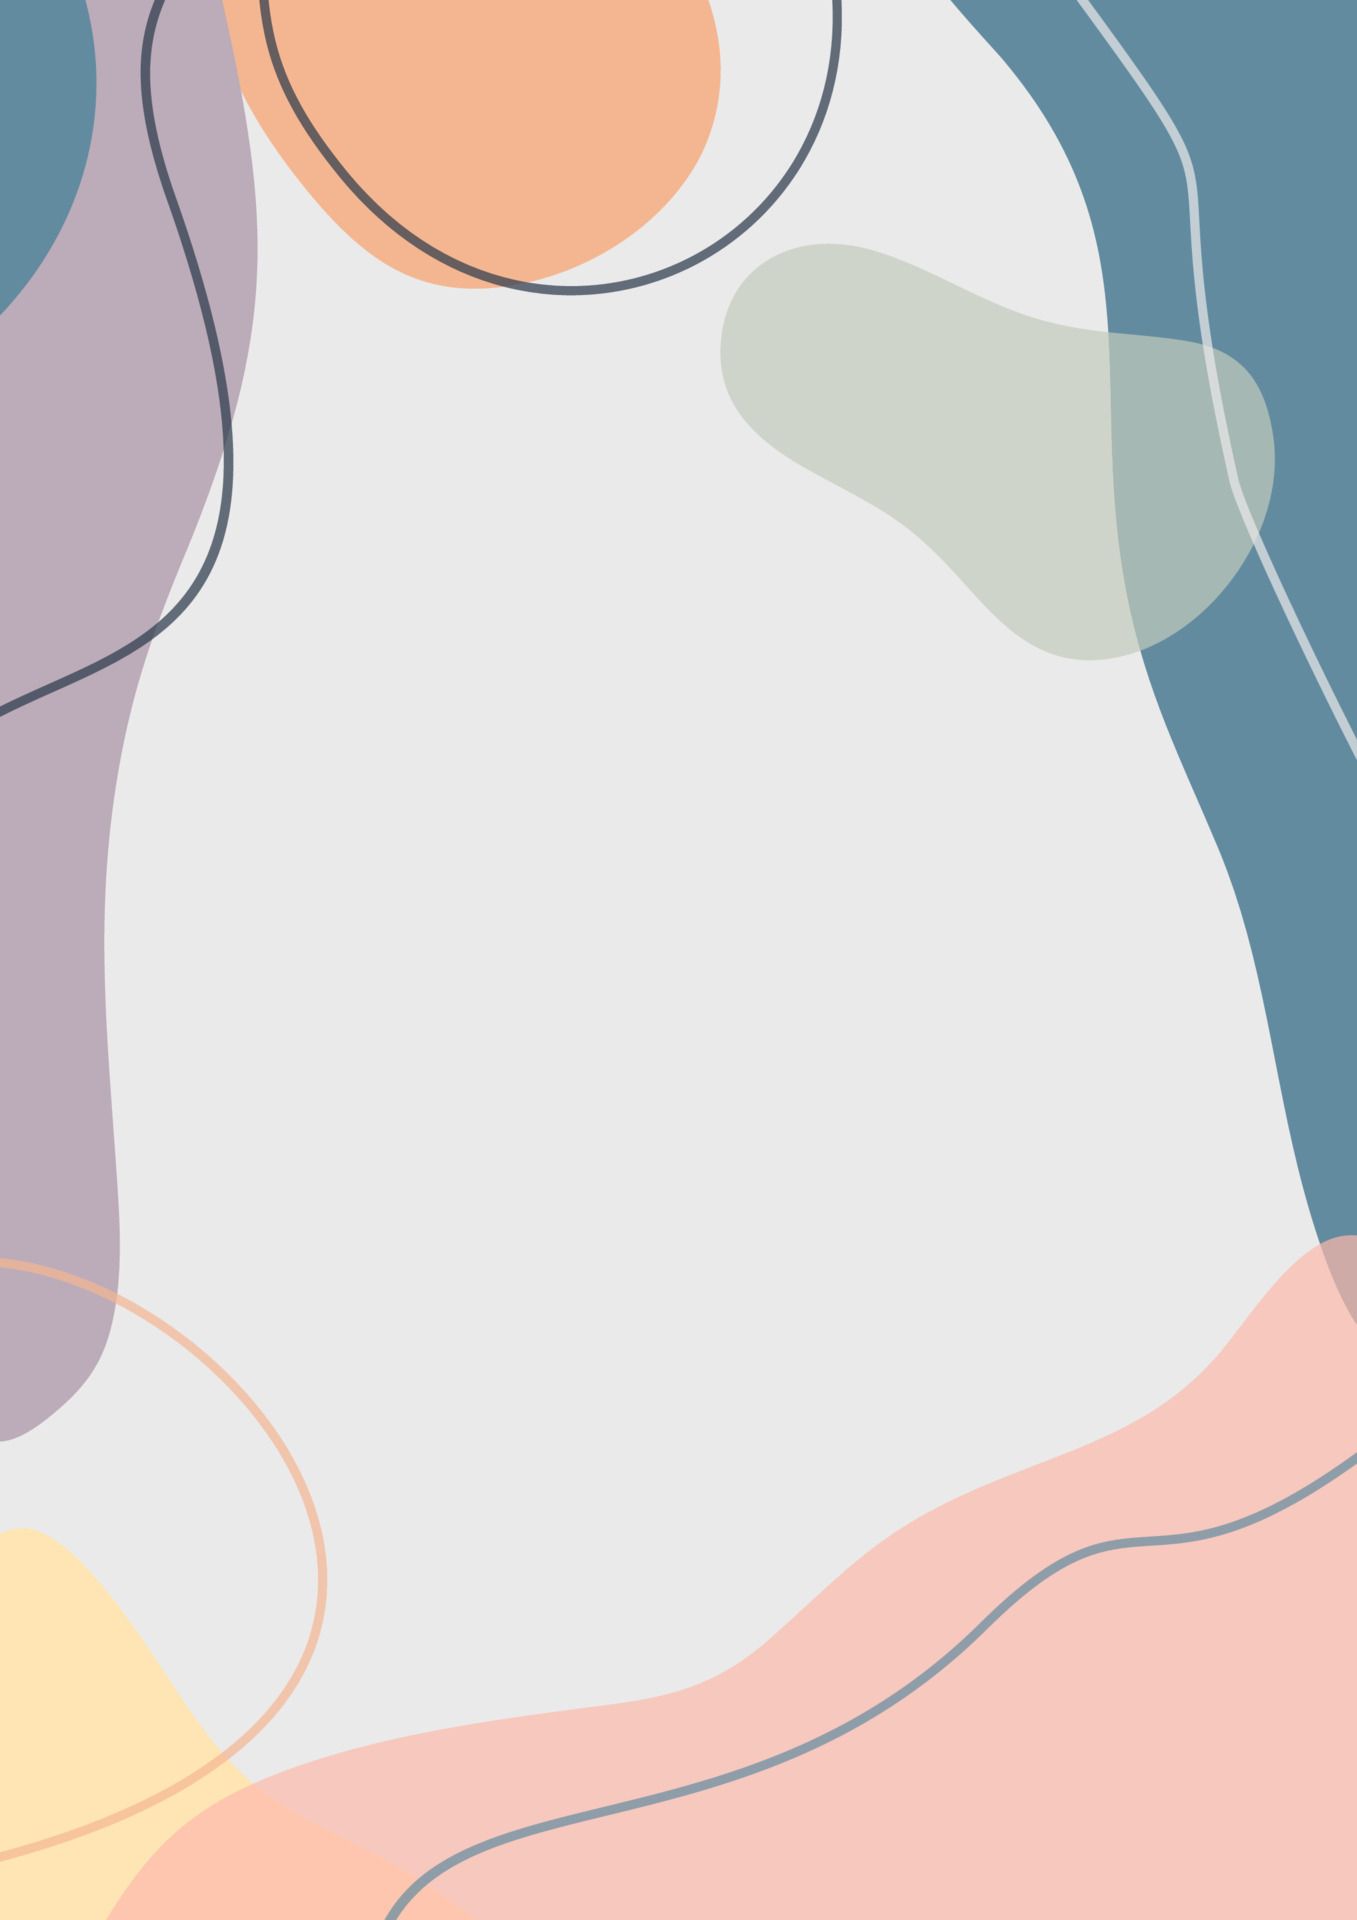 A pastel colored background with abstract shapes - Pastel minimalist